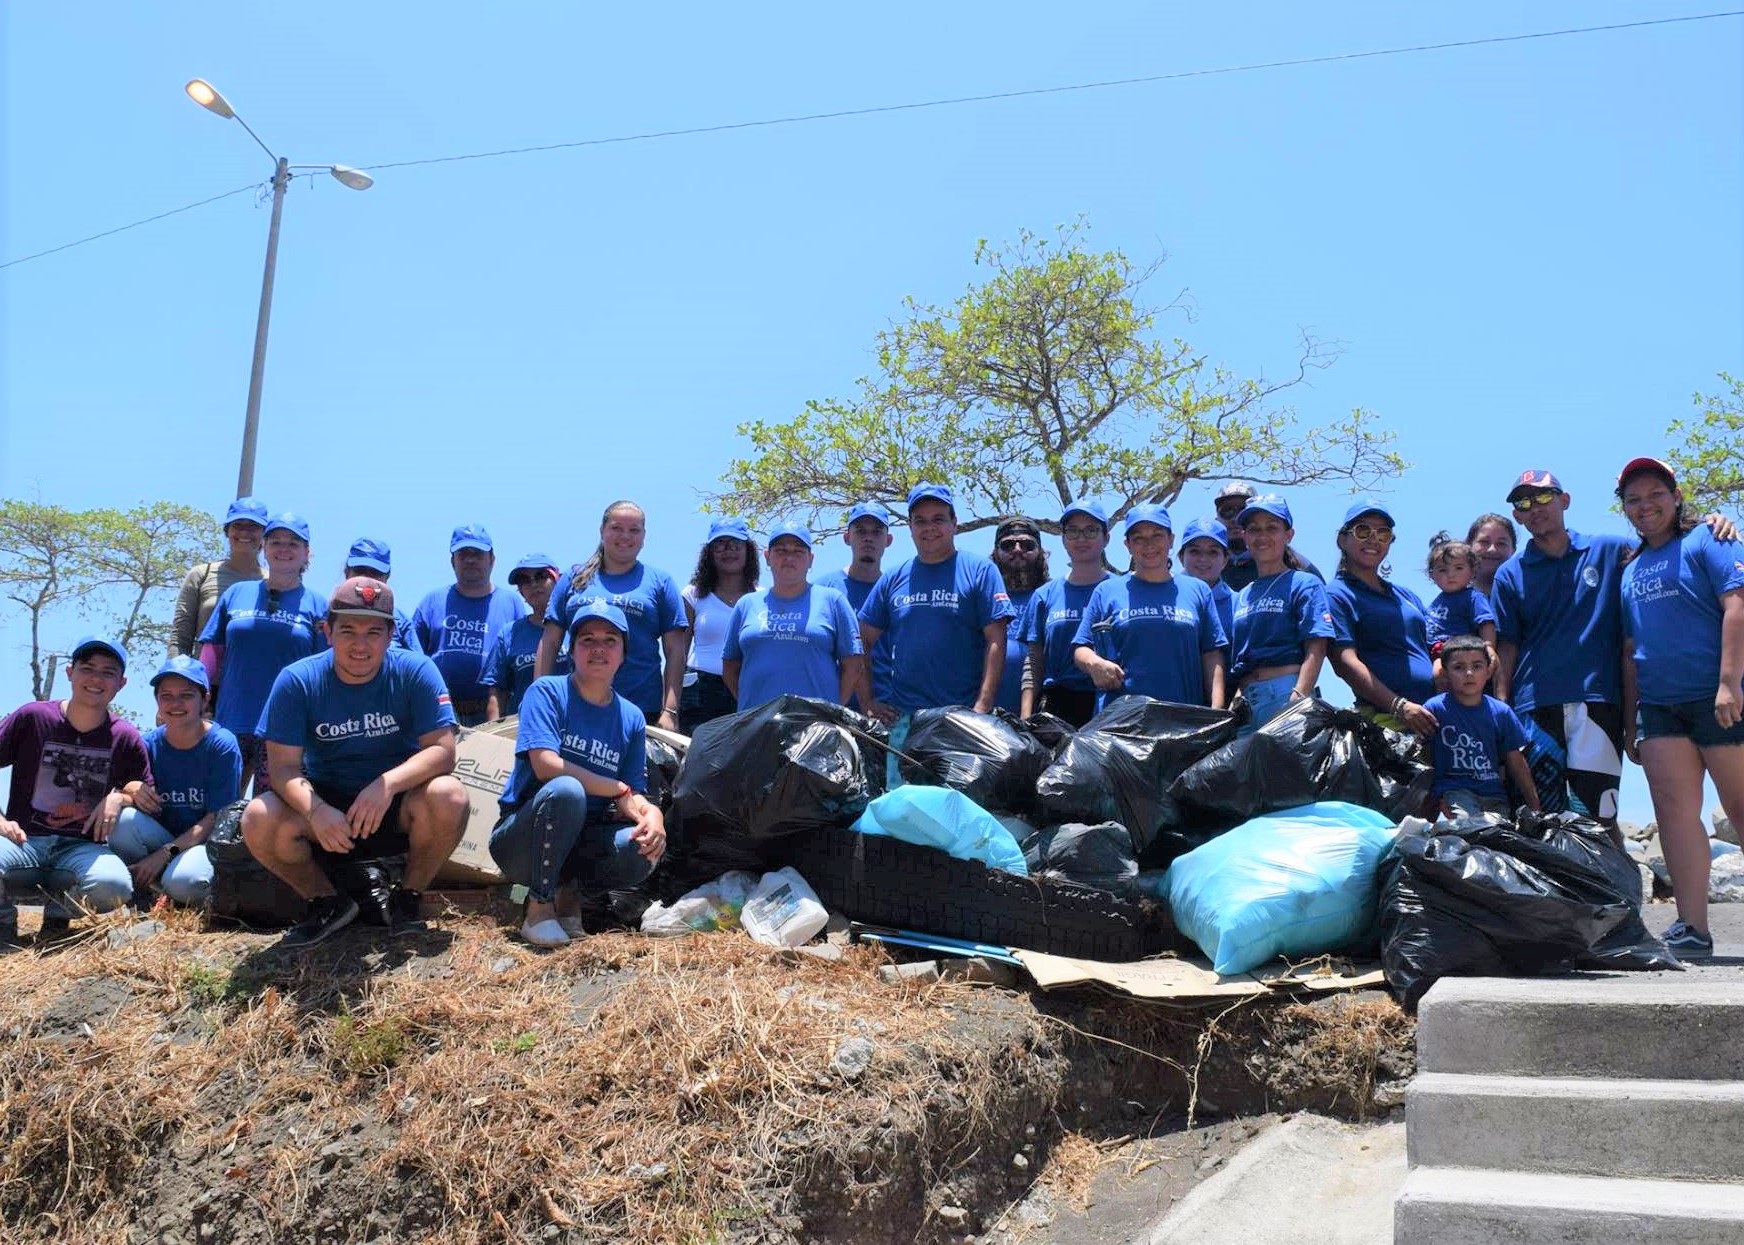 “A group of librarians and community members with garbage bags removed from the beach in Caldera ” by COPROBI is licensed under CC BY 4.0